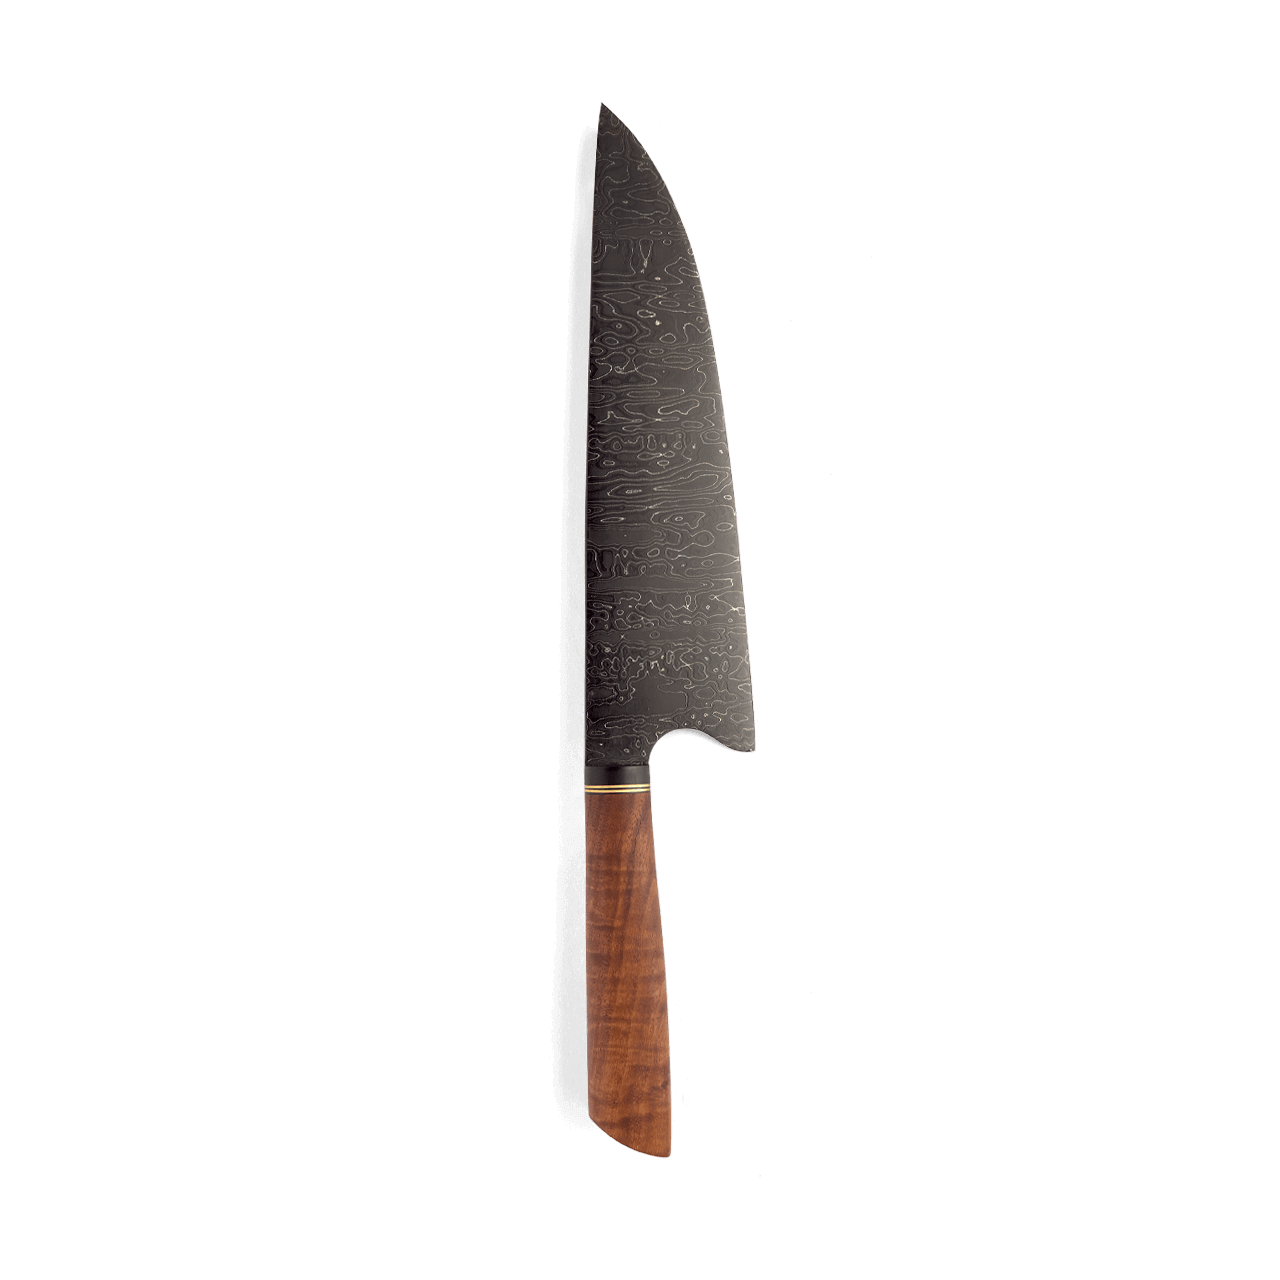 How to Shop For a Knife Like You Know What You're Doing